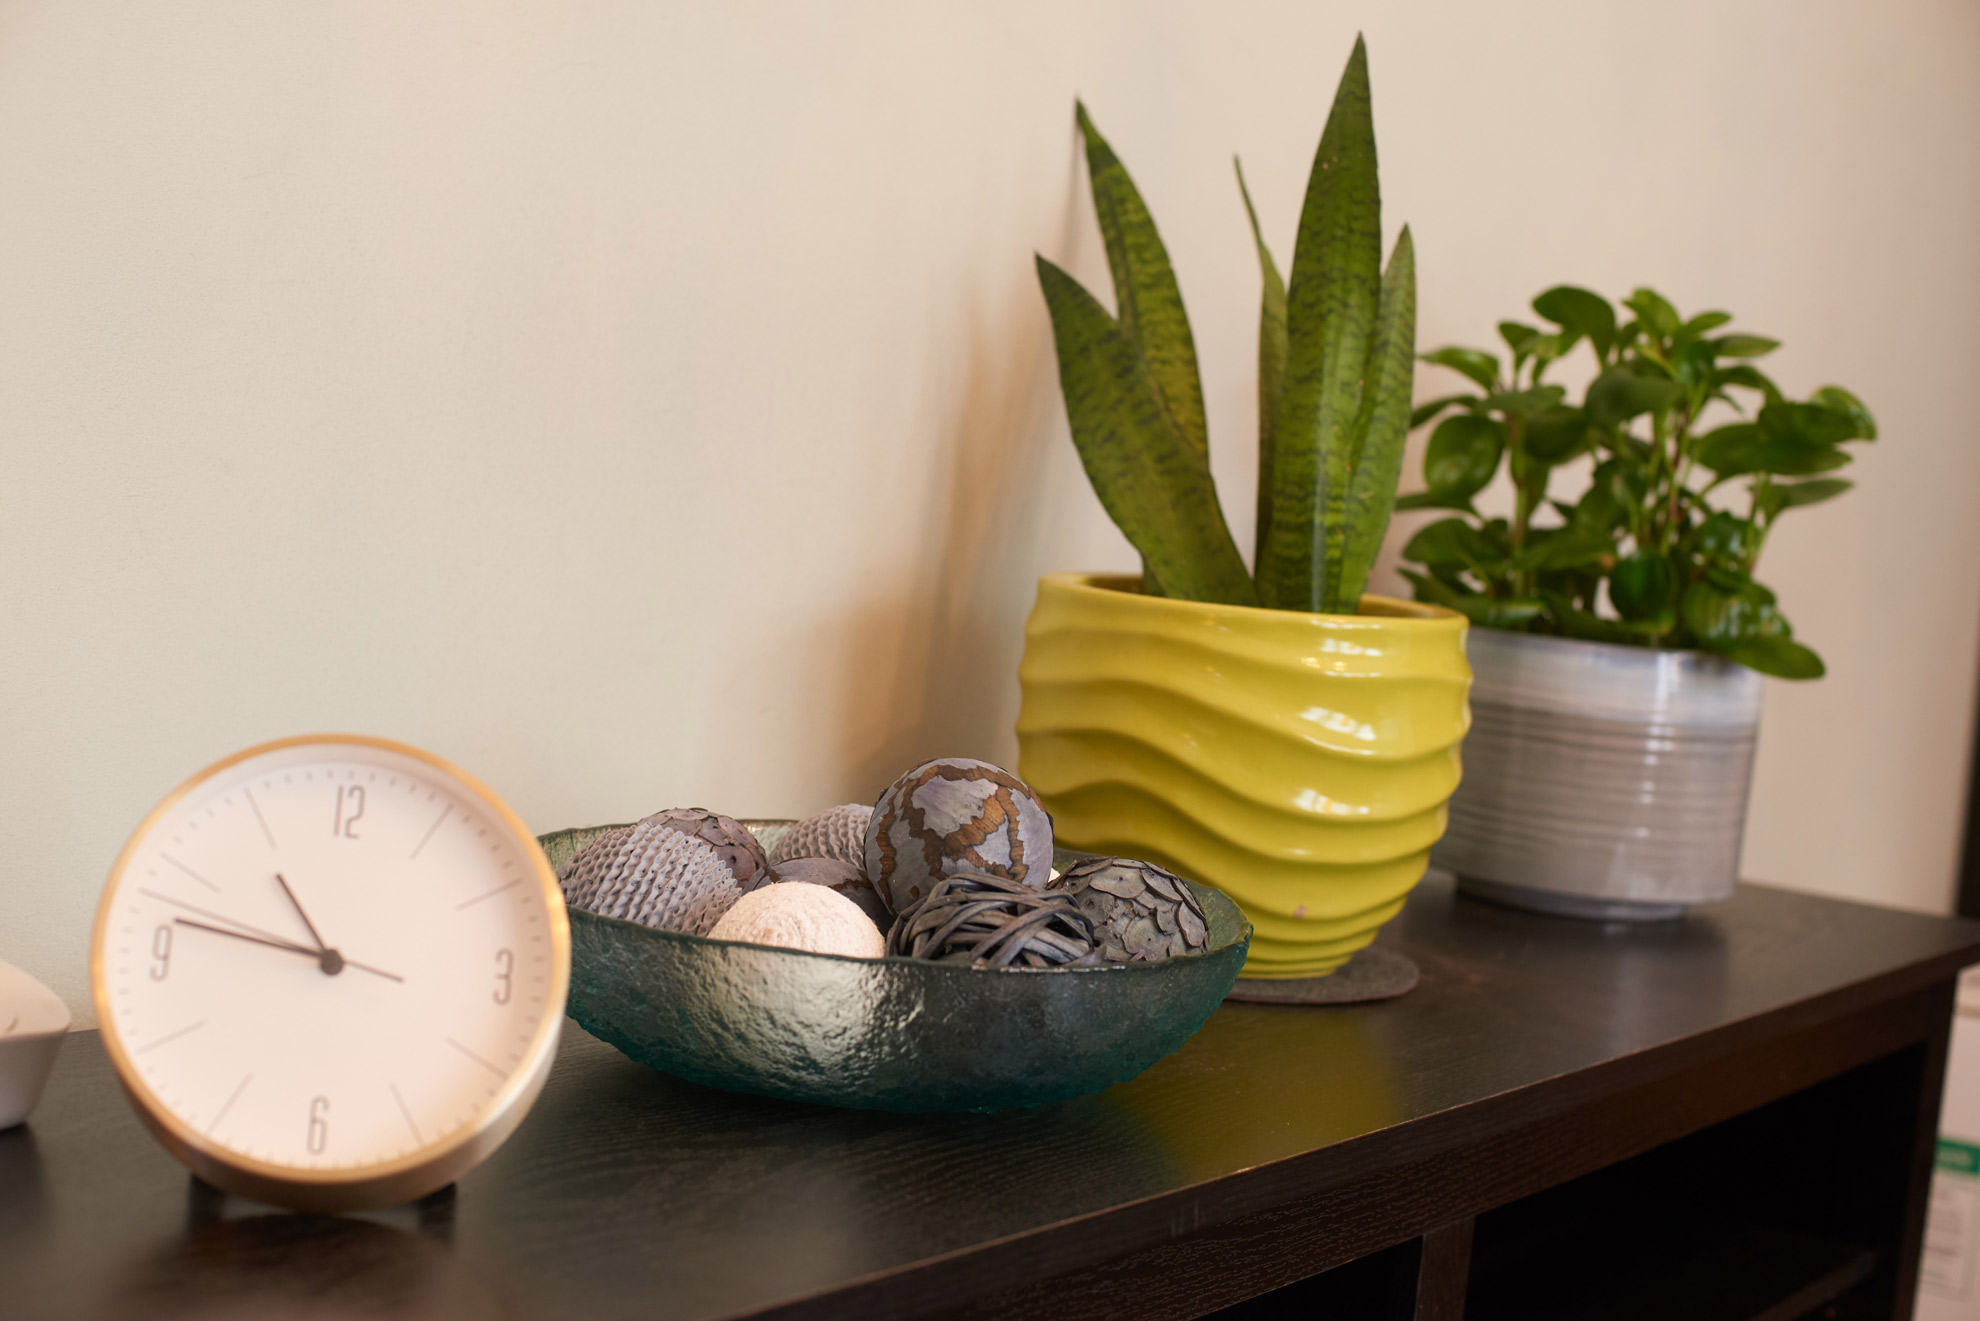 A photo of a clock some decorative objects and some small potted plants